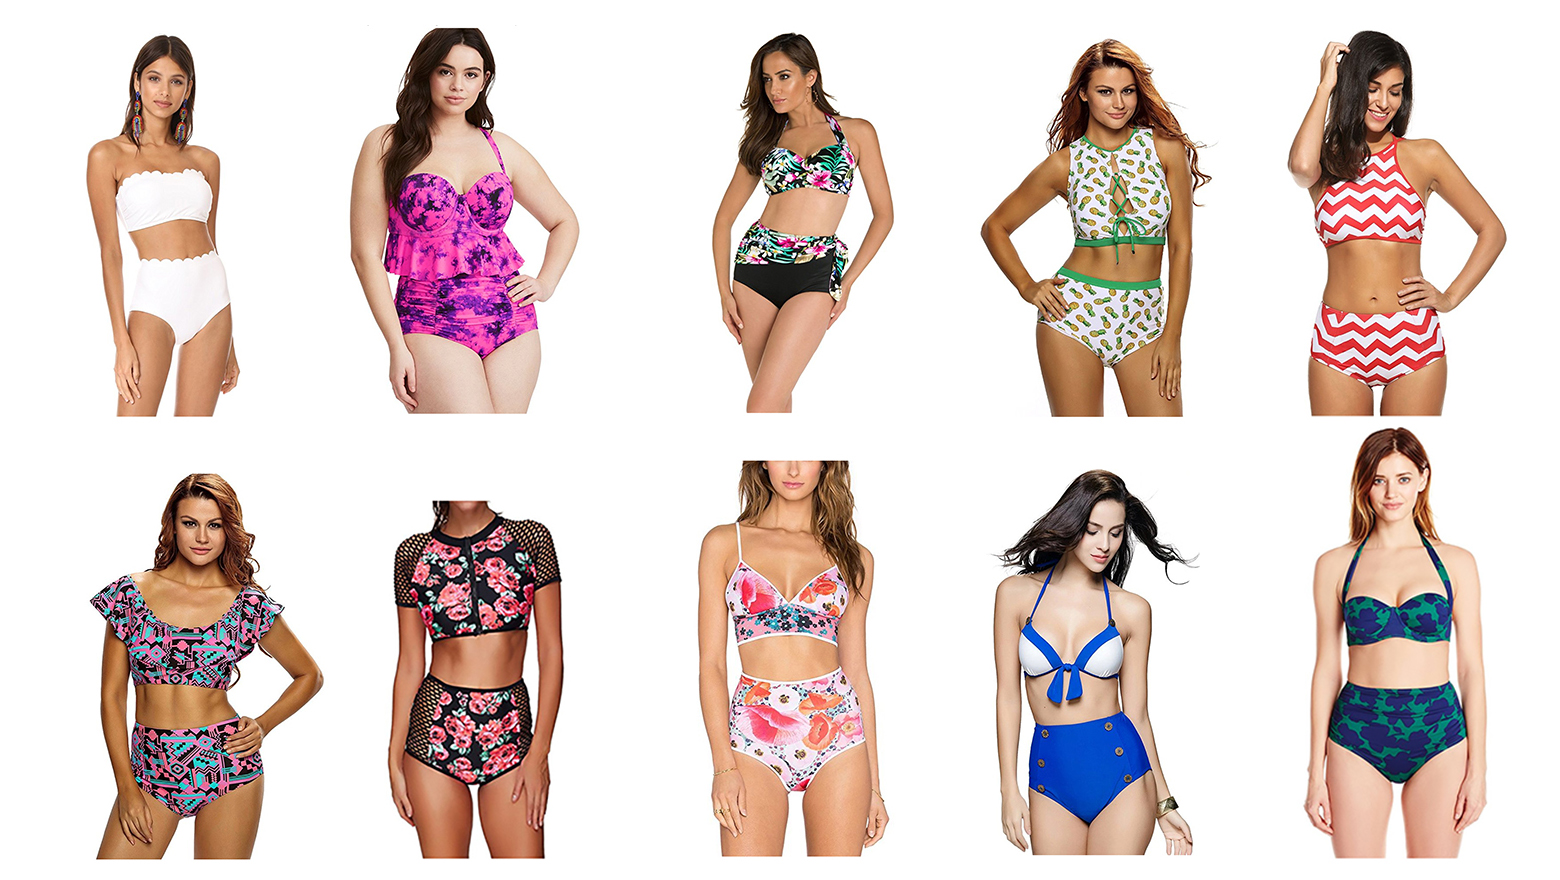 15 Mismatched Swimsuits For An Eye Anne Cole Twisted Tankini Top \u0026 Hig...